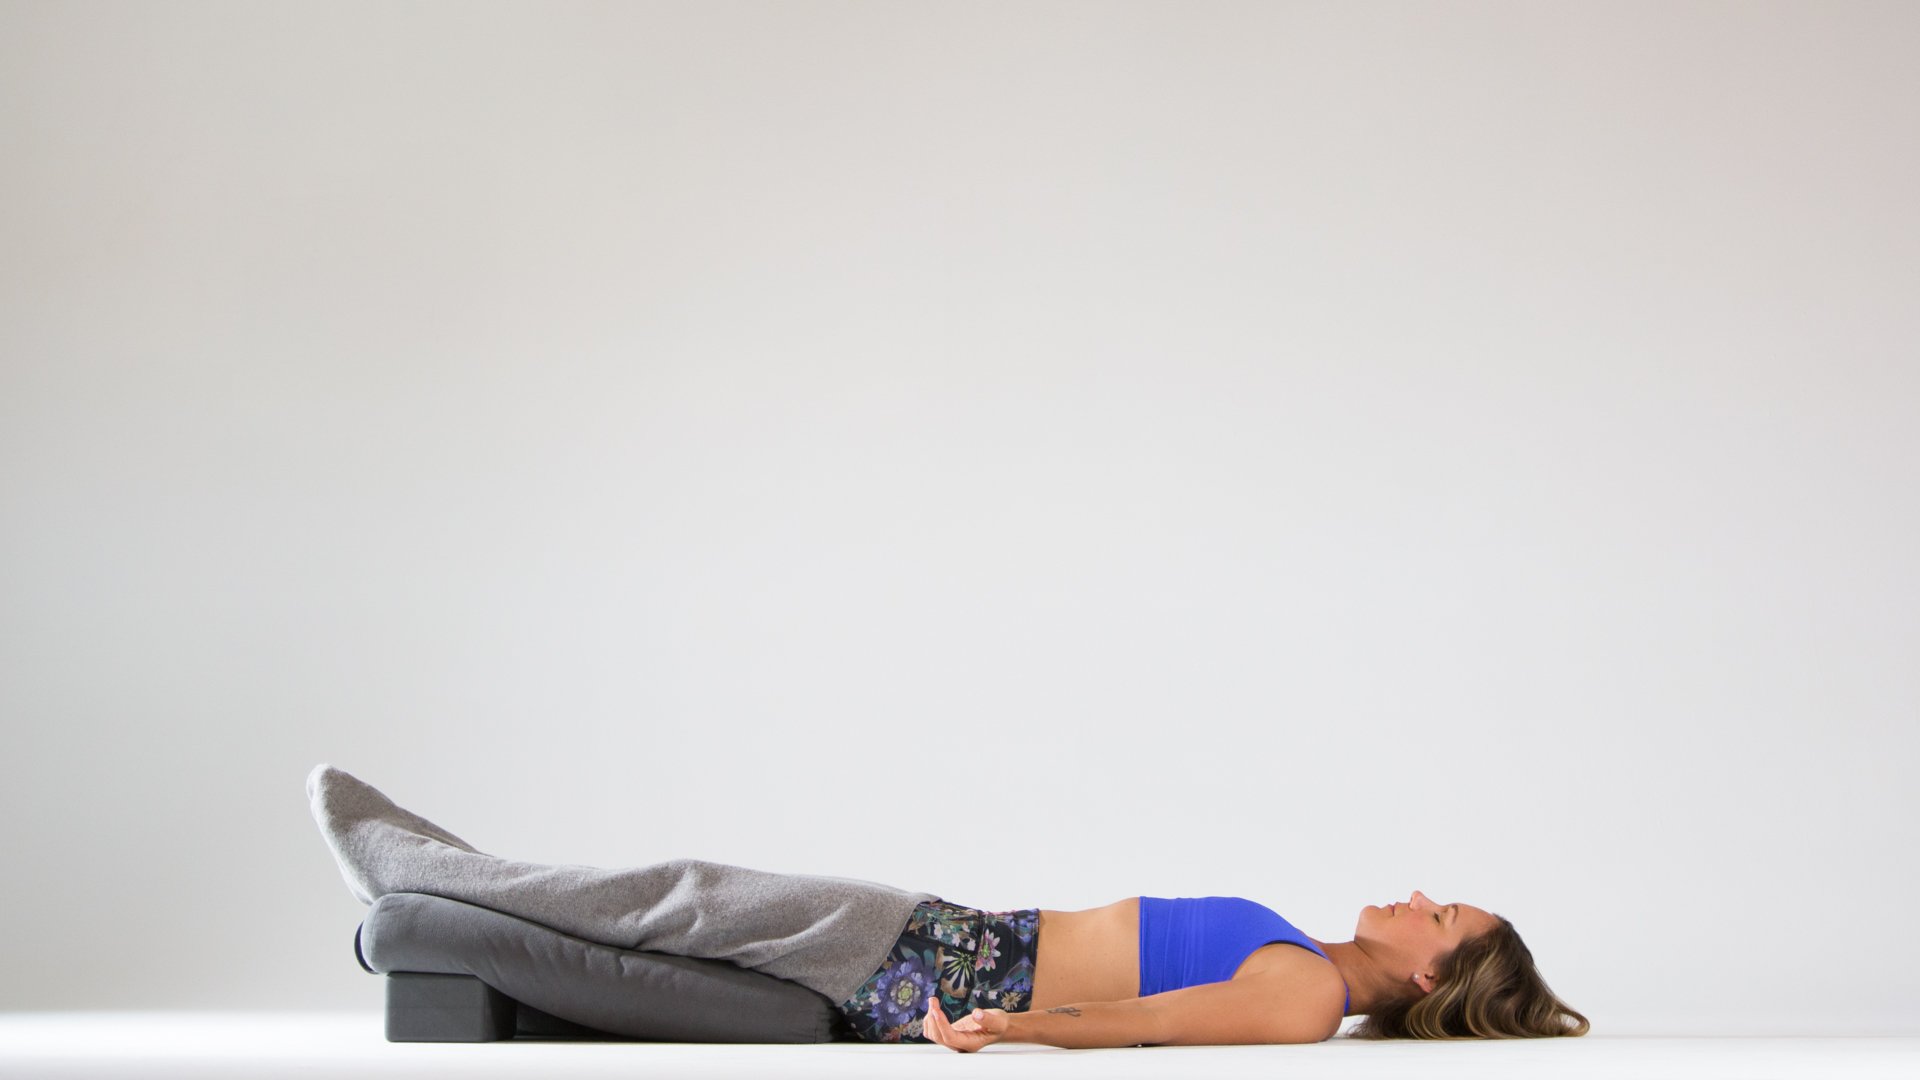 Restorative Yoga Will Revitalize and Energize Your Body